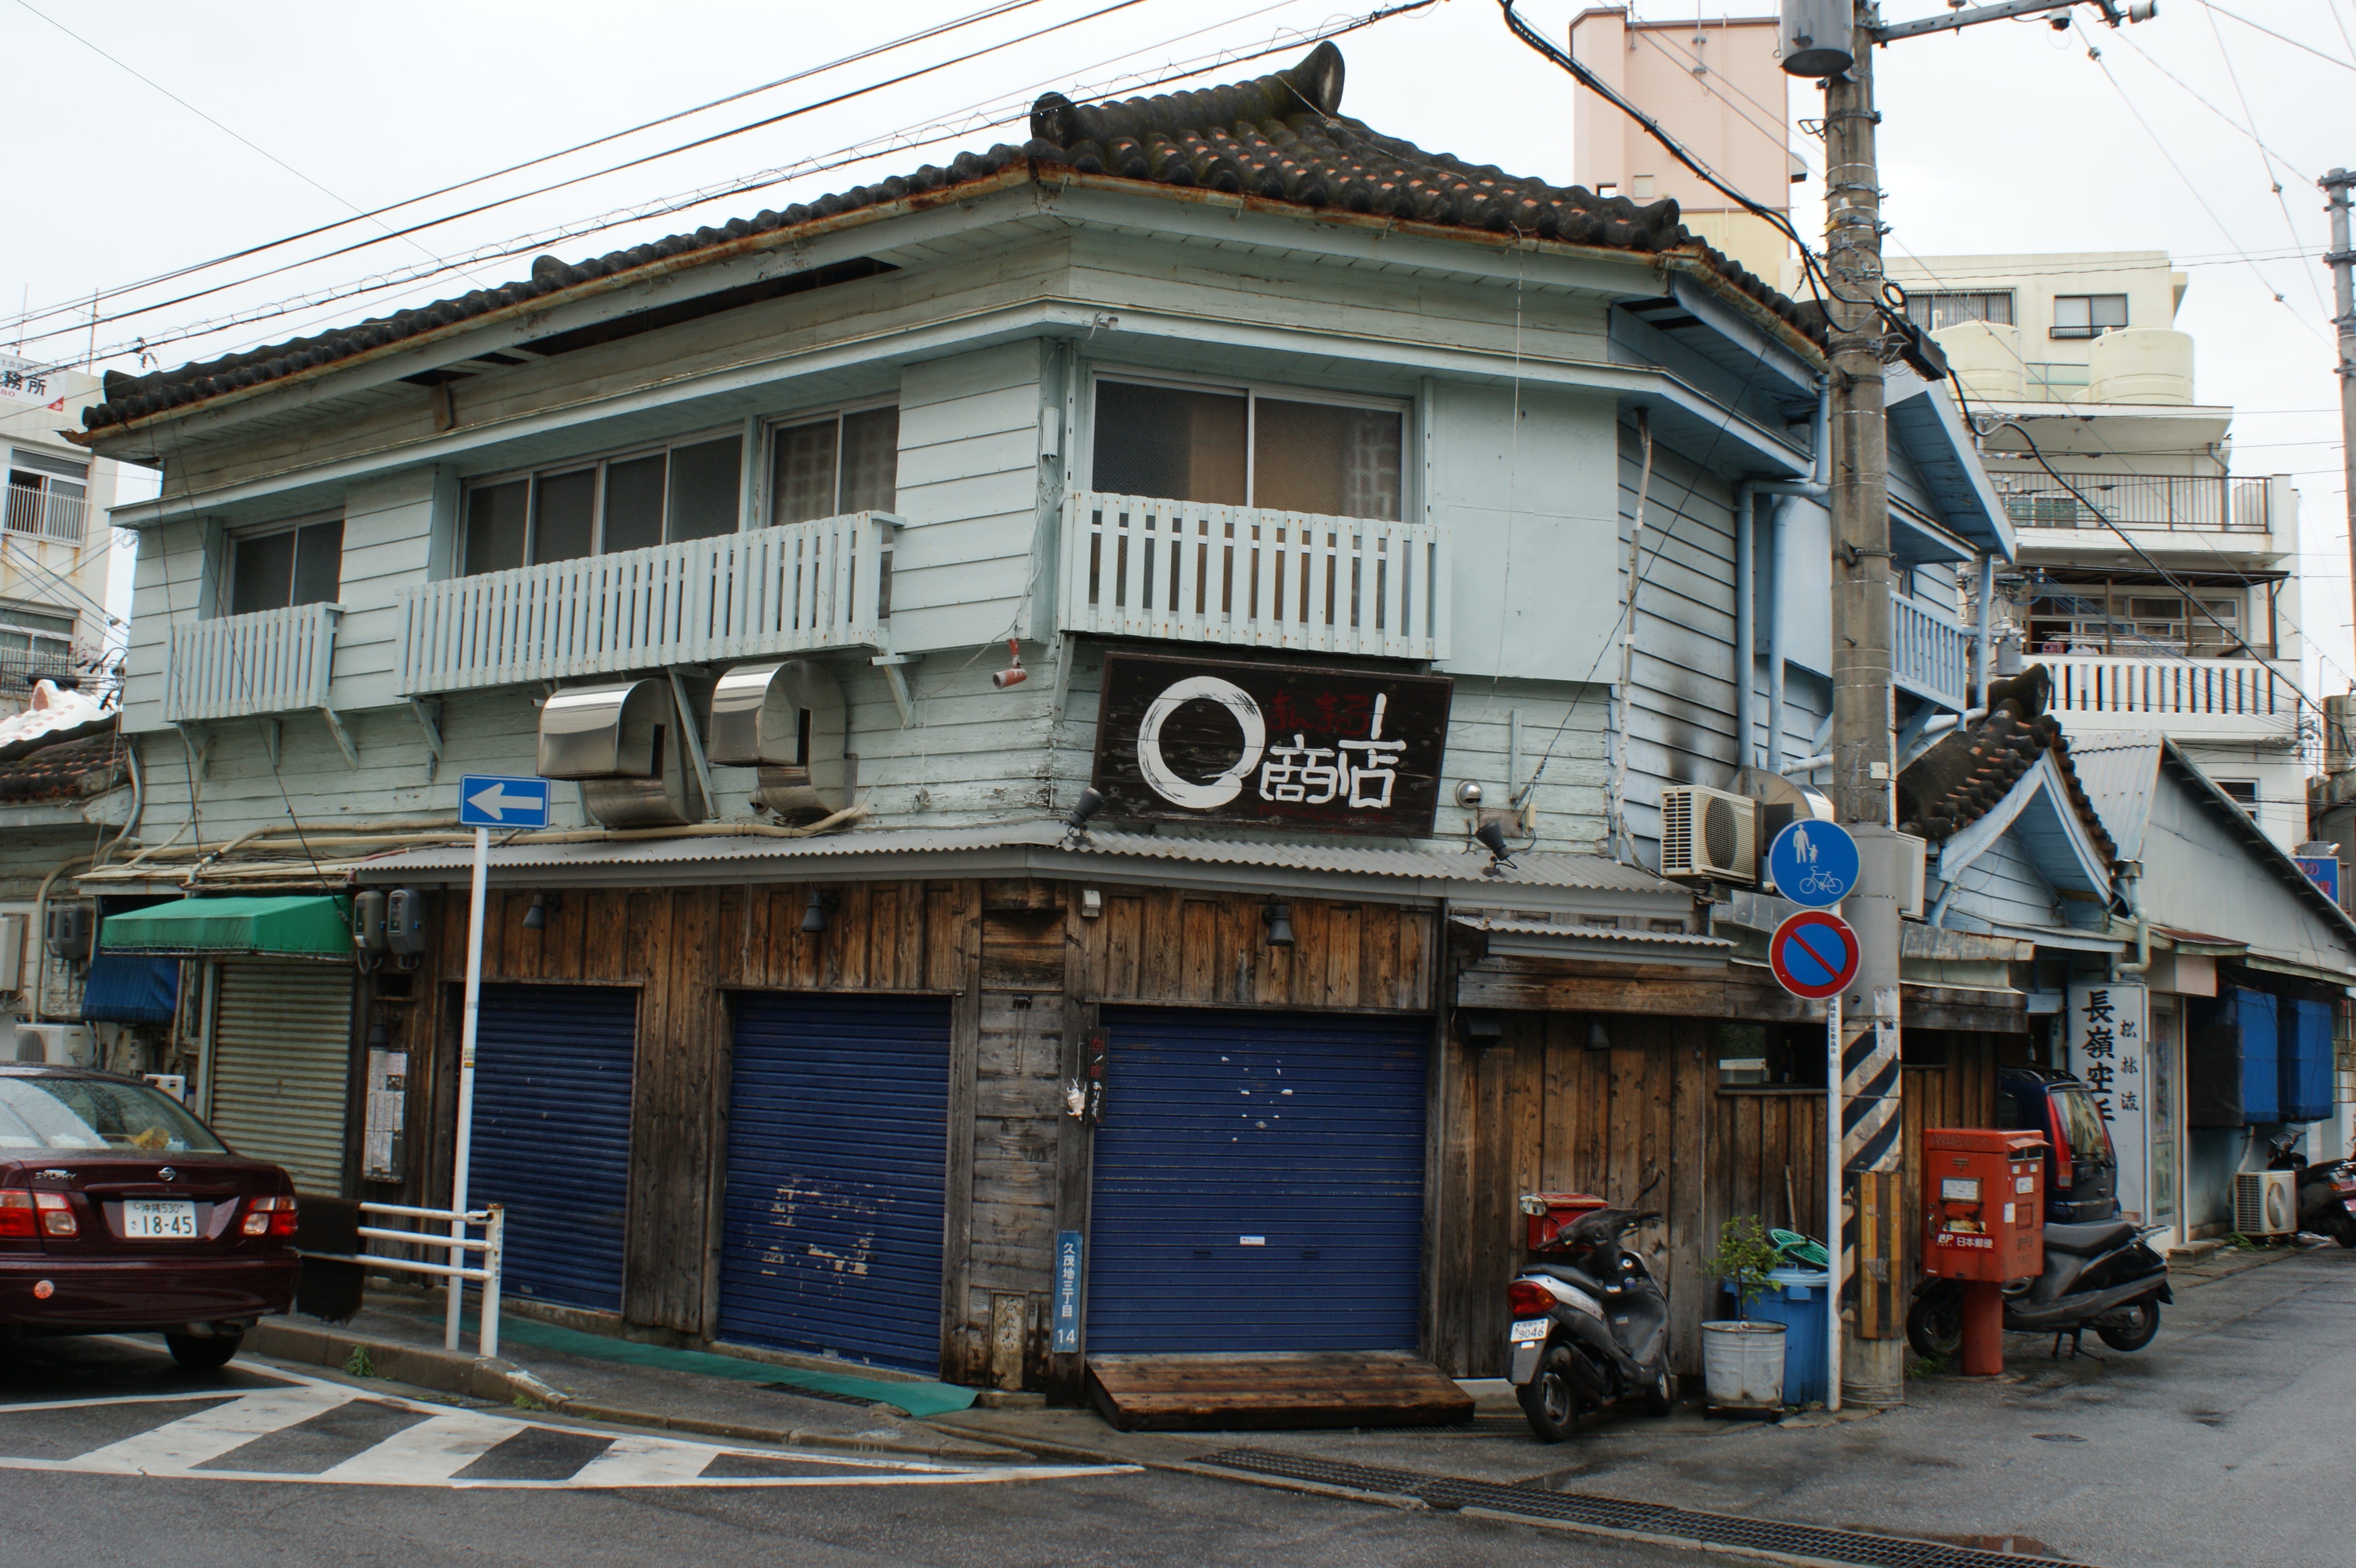 The former Dojo building in Naha Kumoji. It was a big old wooden house with living quarters for family and students, kitchen, changing rooms, socializing space, dojo itself and so on.